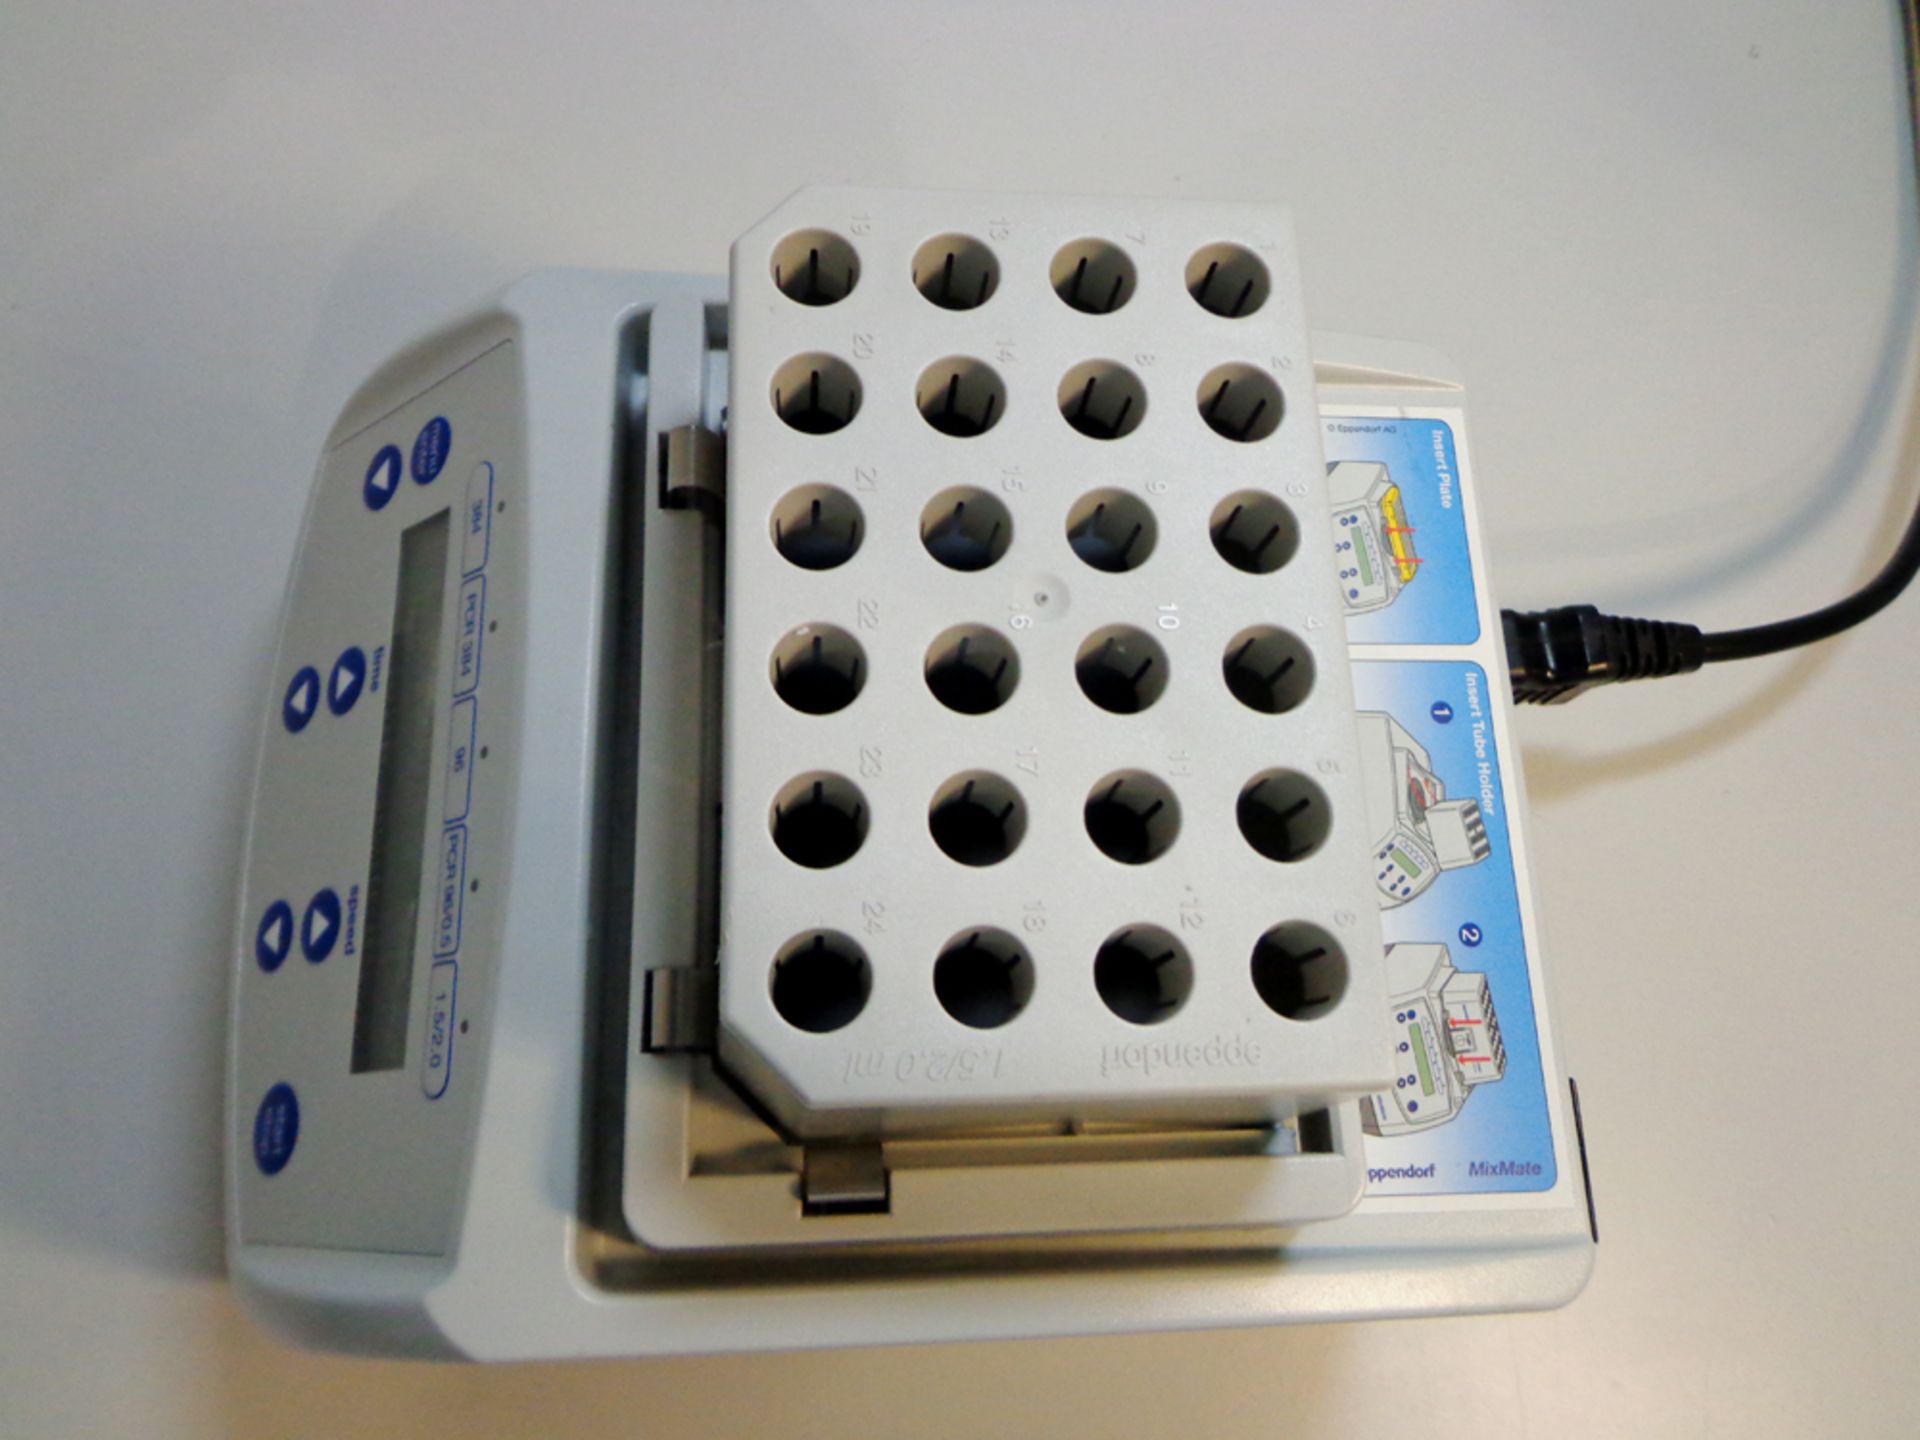 Eppendorf Mixmate Microplate Shaker, model 5353, S/N 5353AN013266 - Image 3 of 7